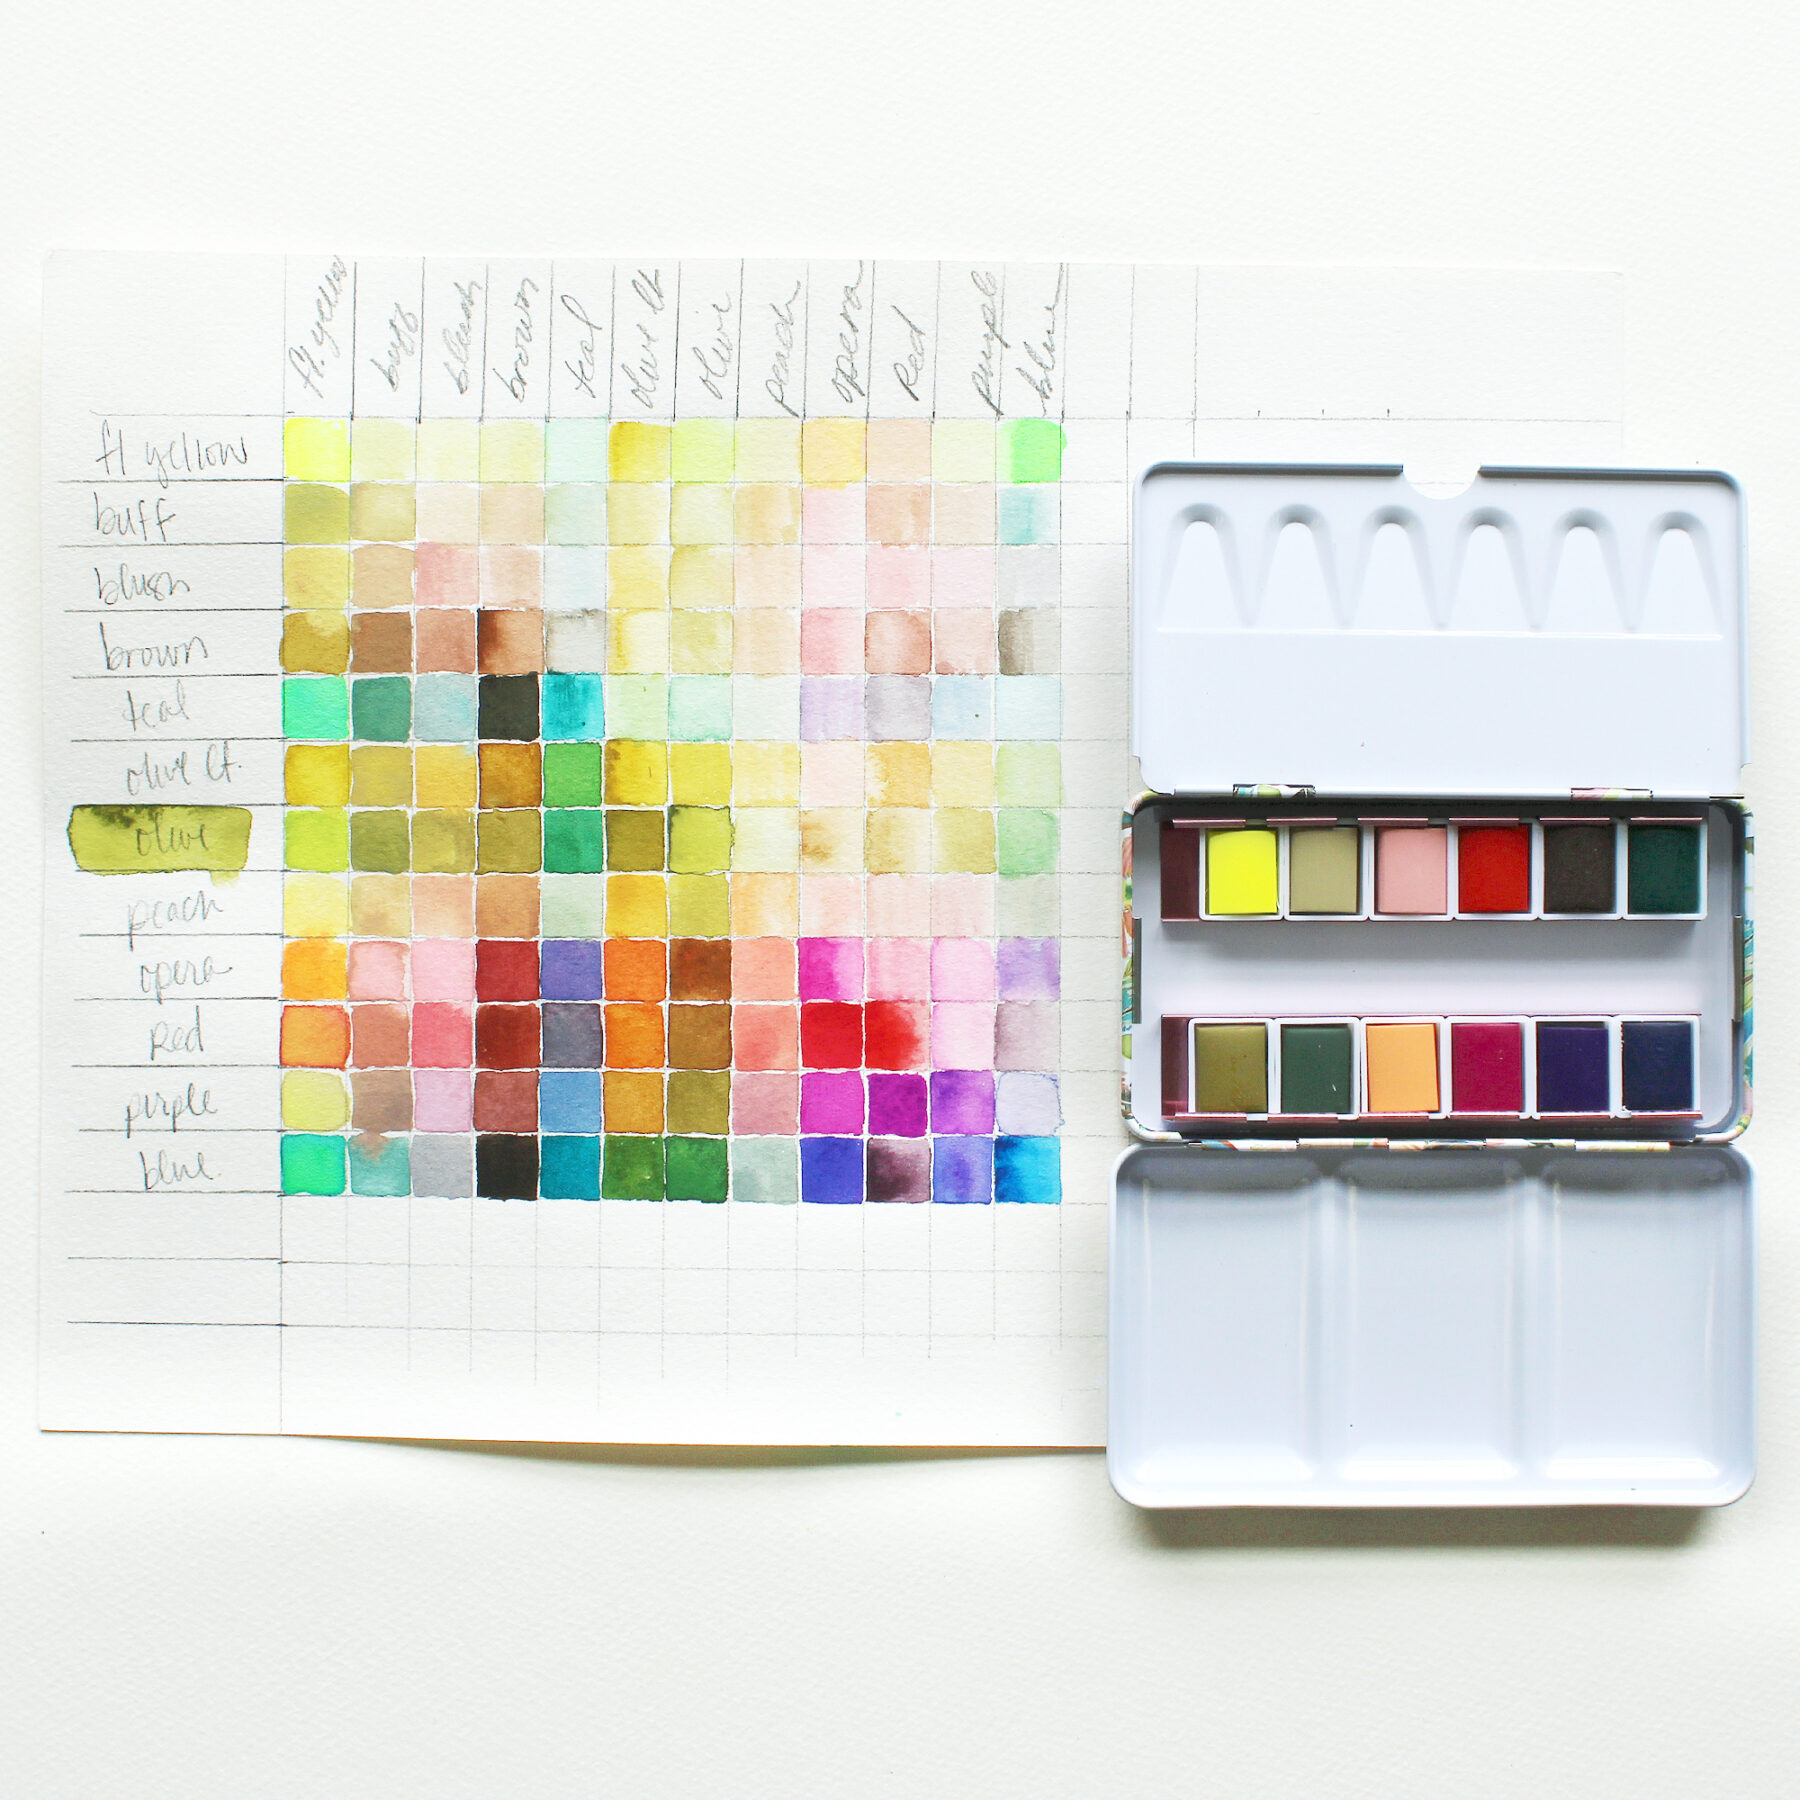 The Making Art for Joy's Sake Watercolor Palette - Unique Shopping for  Artistic Gifts